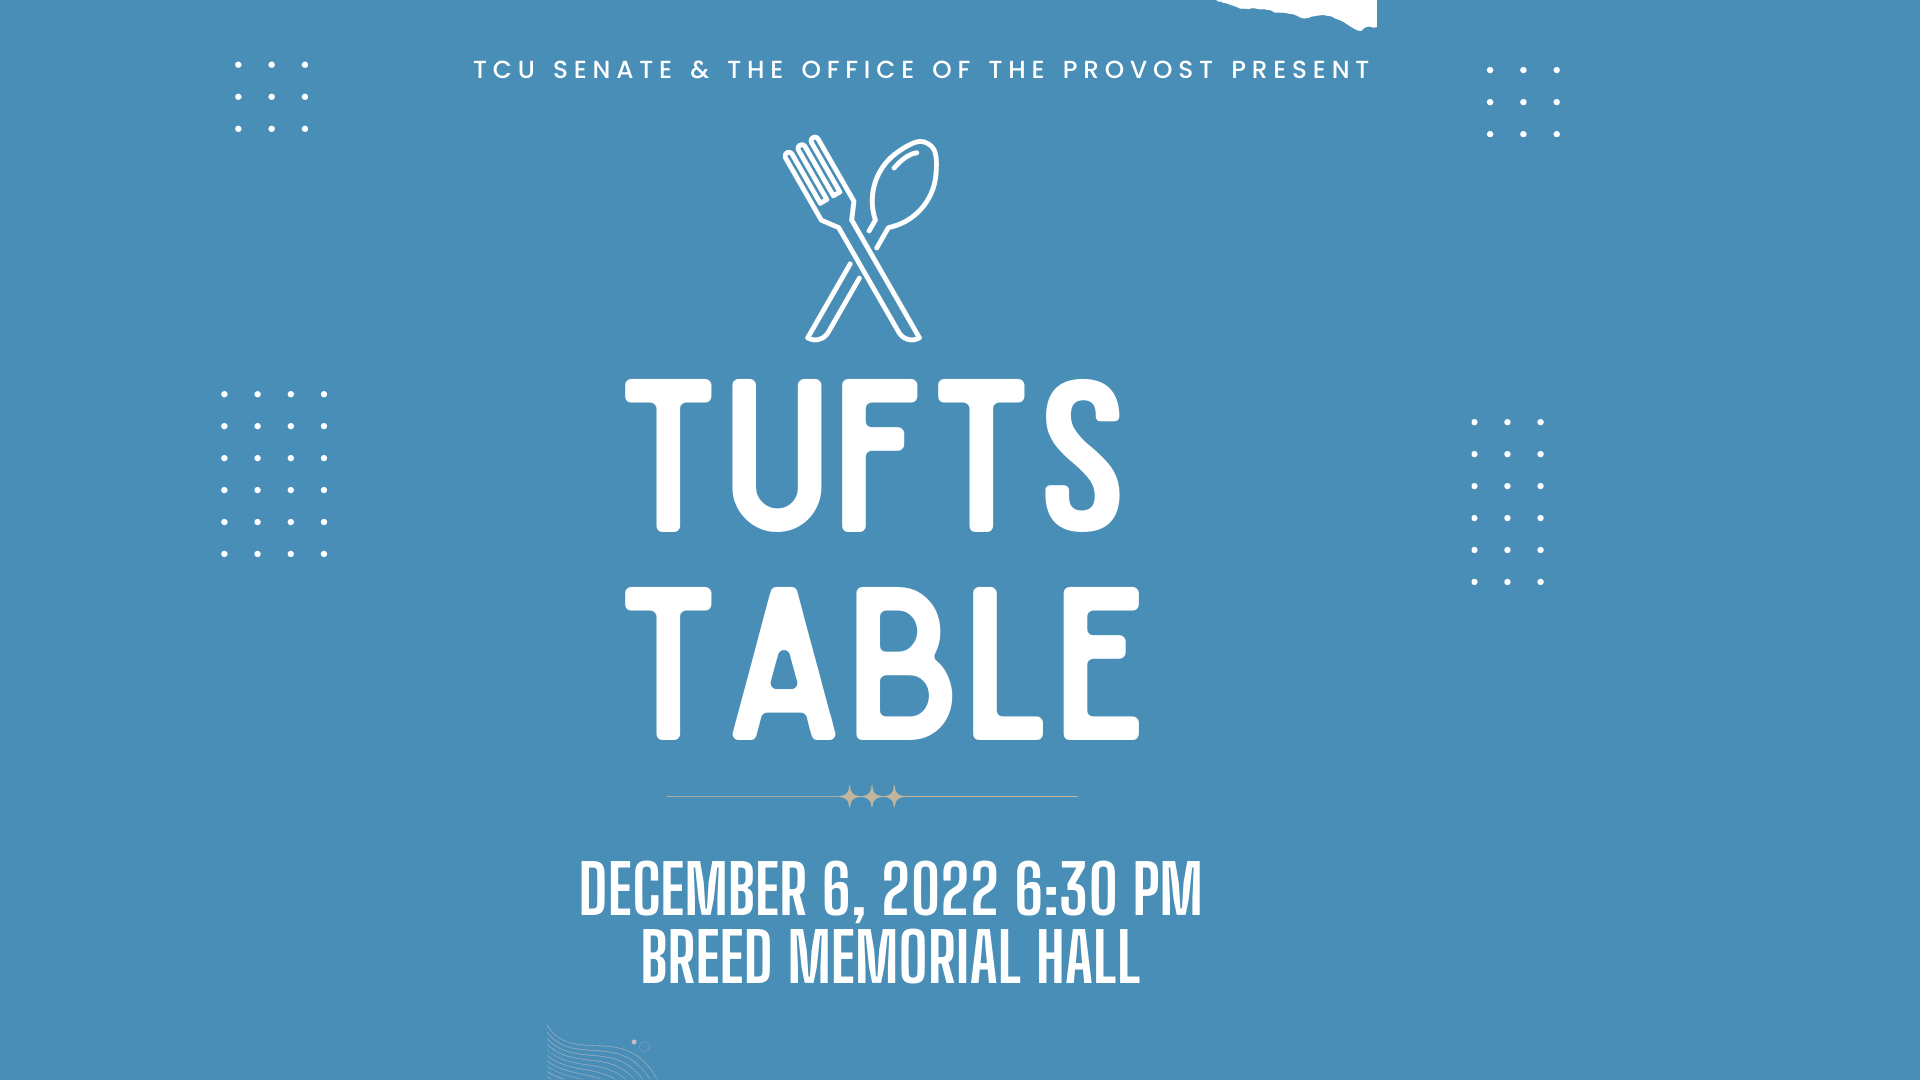 Take a Seat at Tufts Table: December 6th at 6:30 p.m.